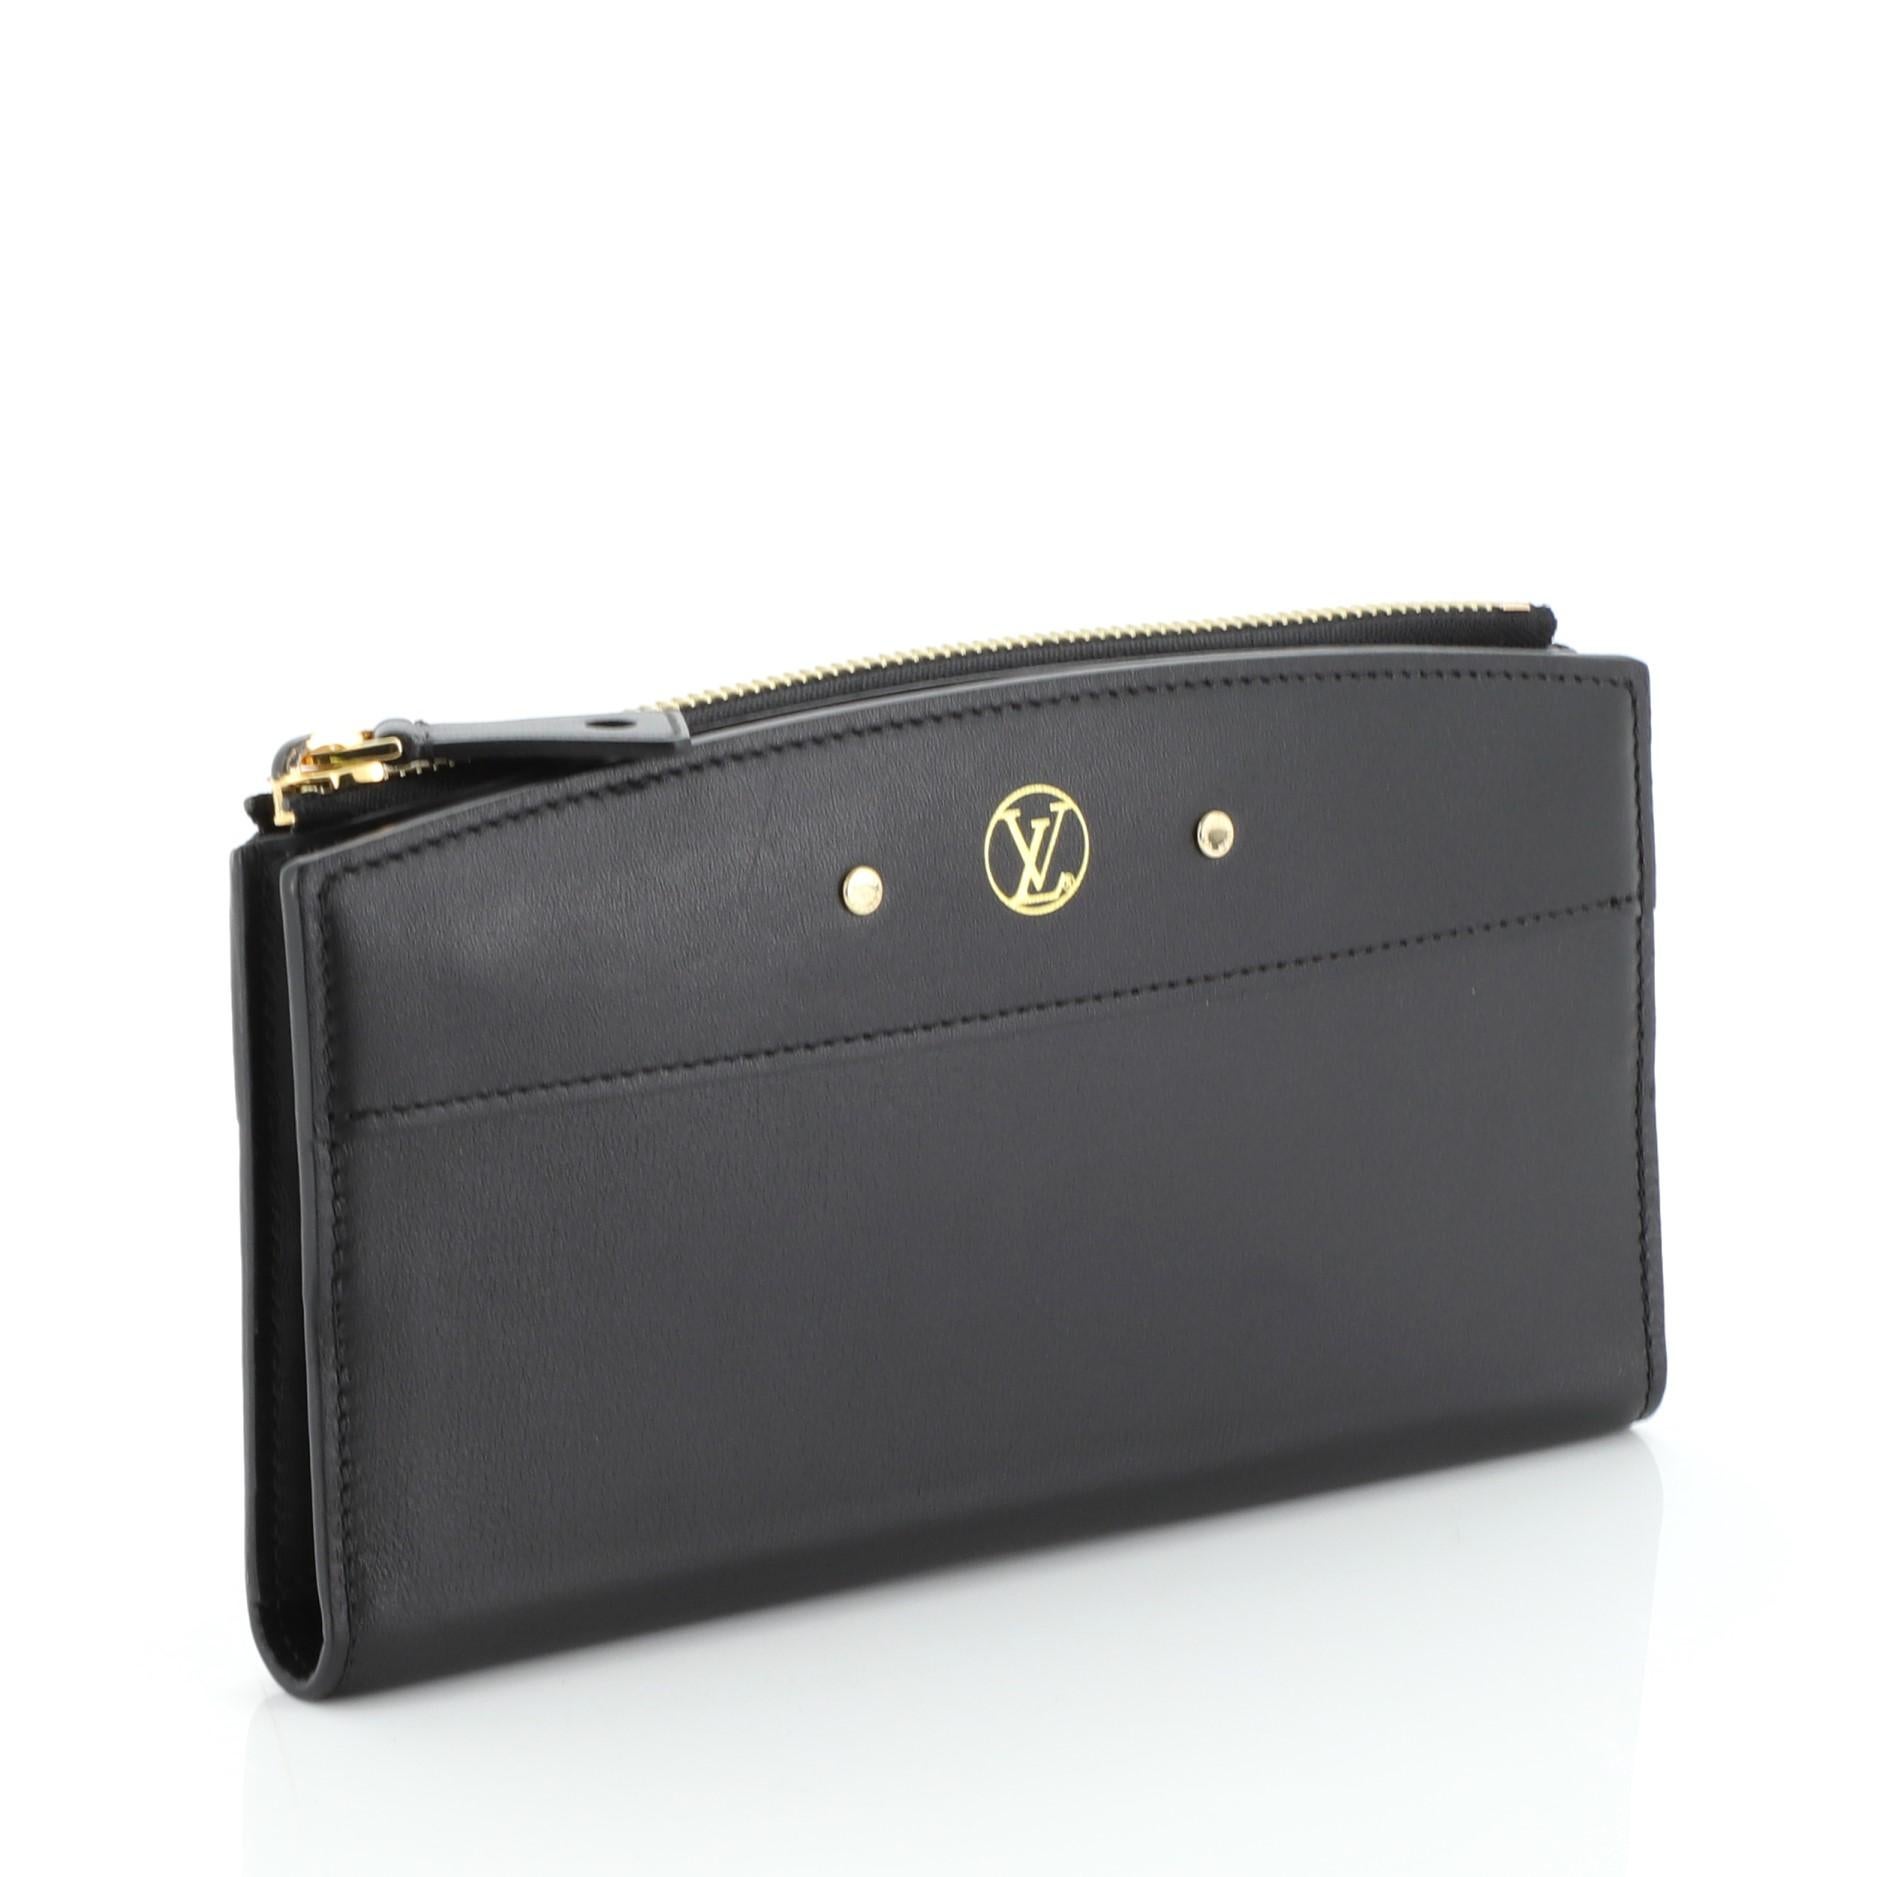 This Louis Vuitton City Steamer Wallet Leather, crafted from black leather, features signature LV logo and gold tone hardware. Its zip closure opens to a black leather interior. Authenticity code reads: MI1146. 

Estimated Retail Price: